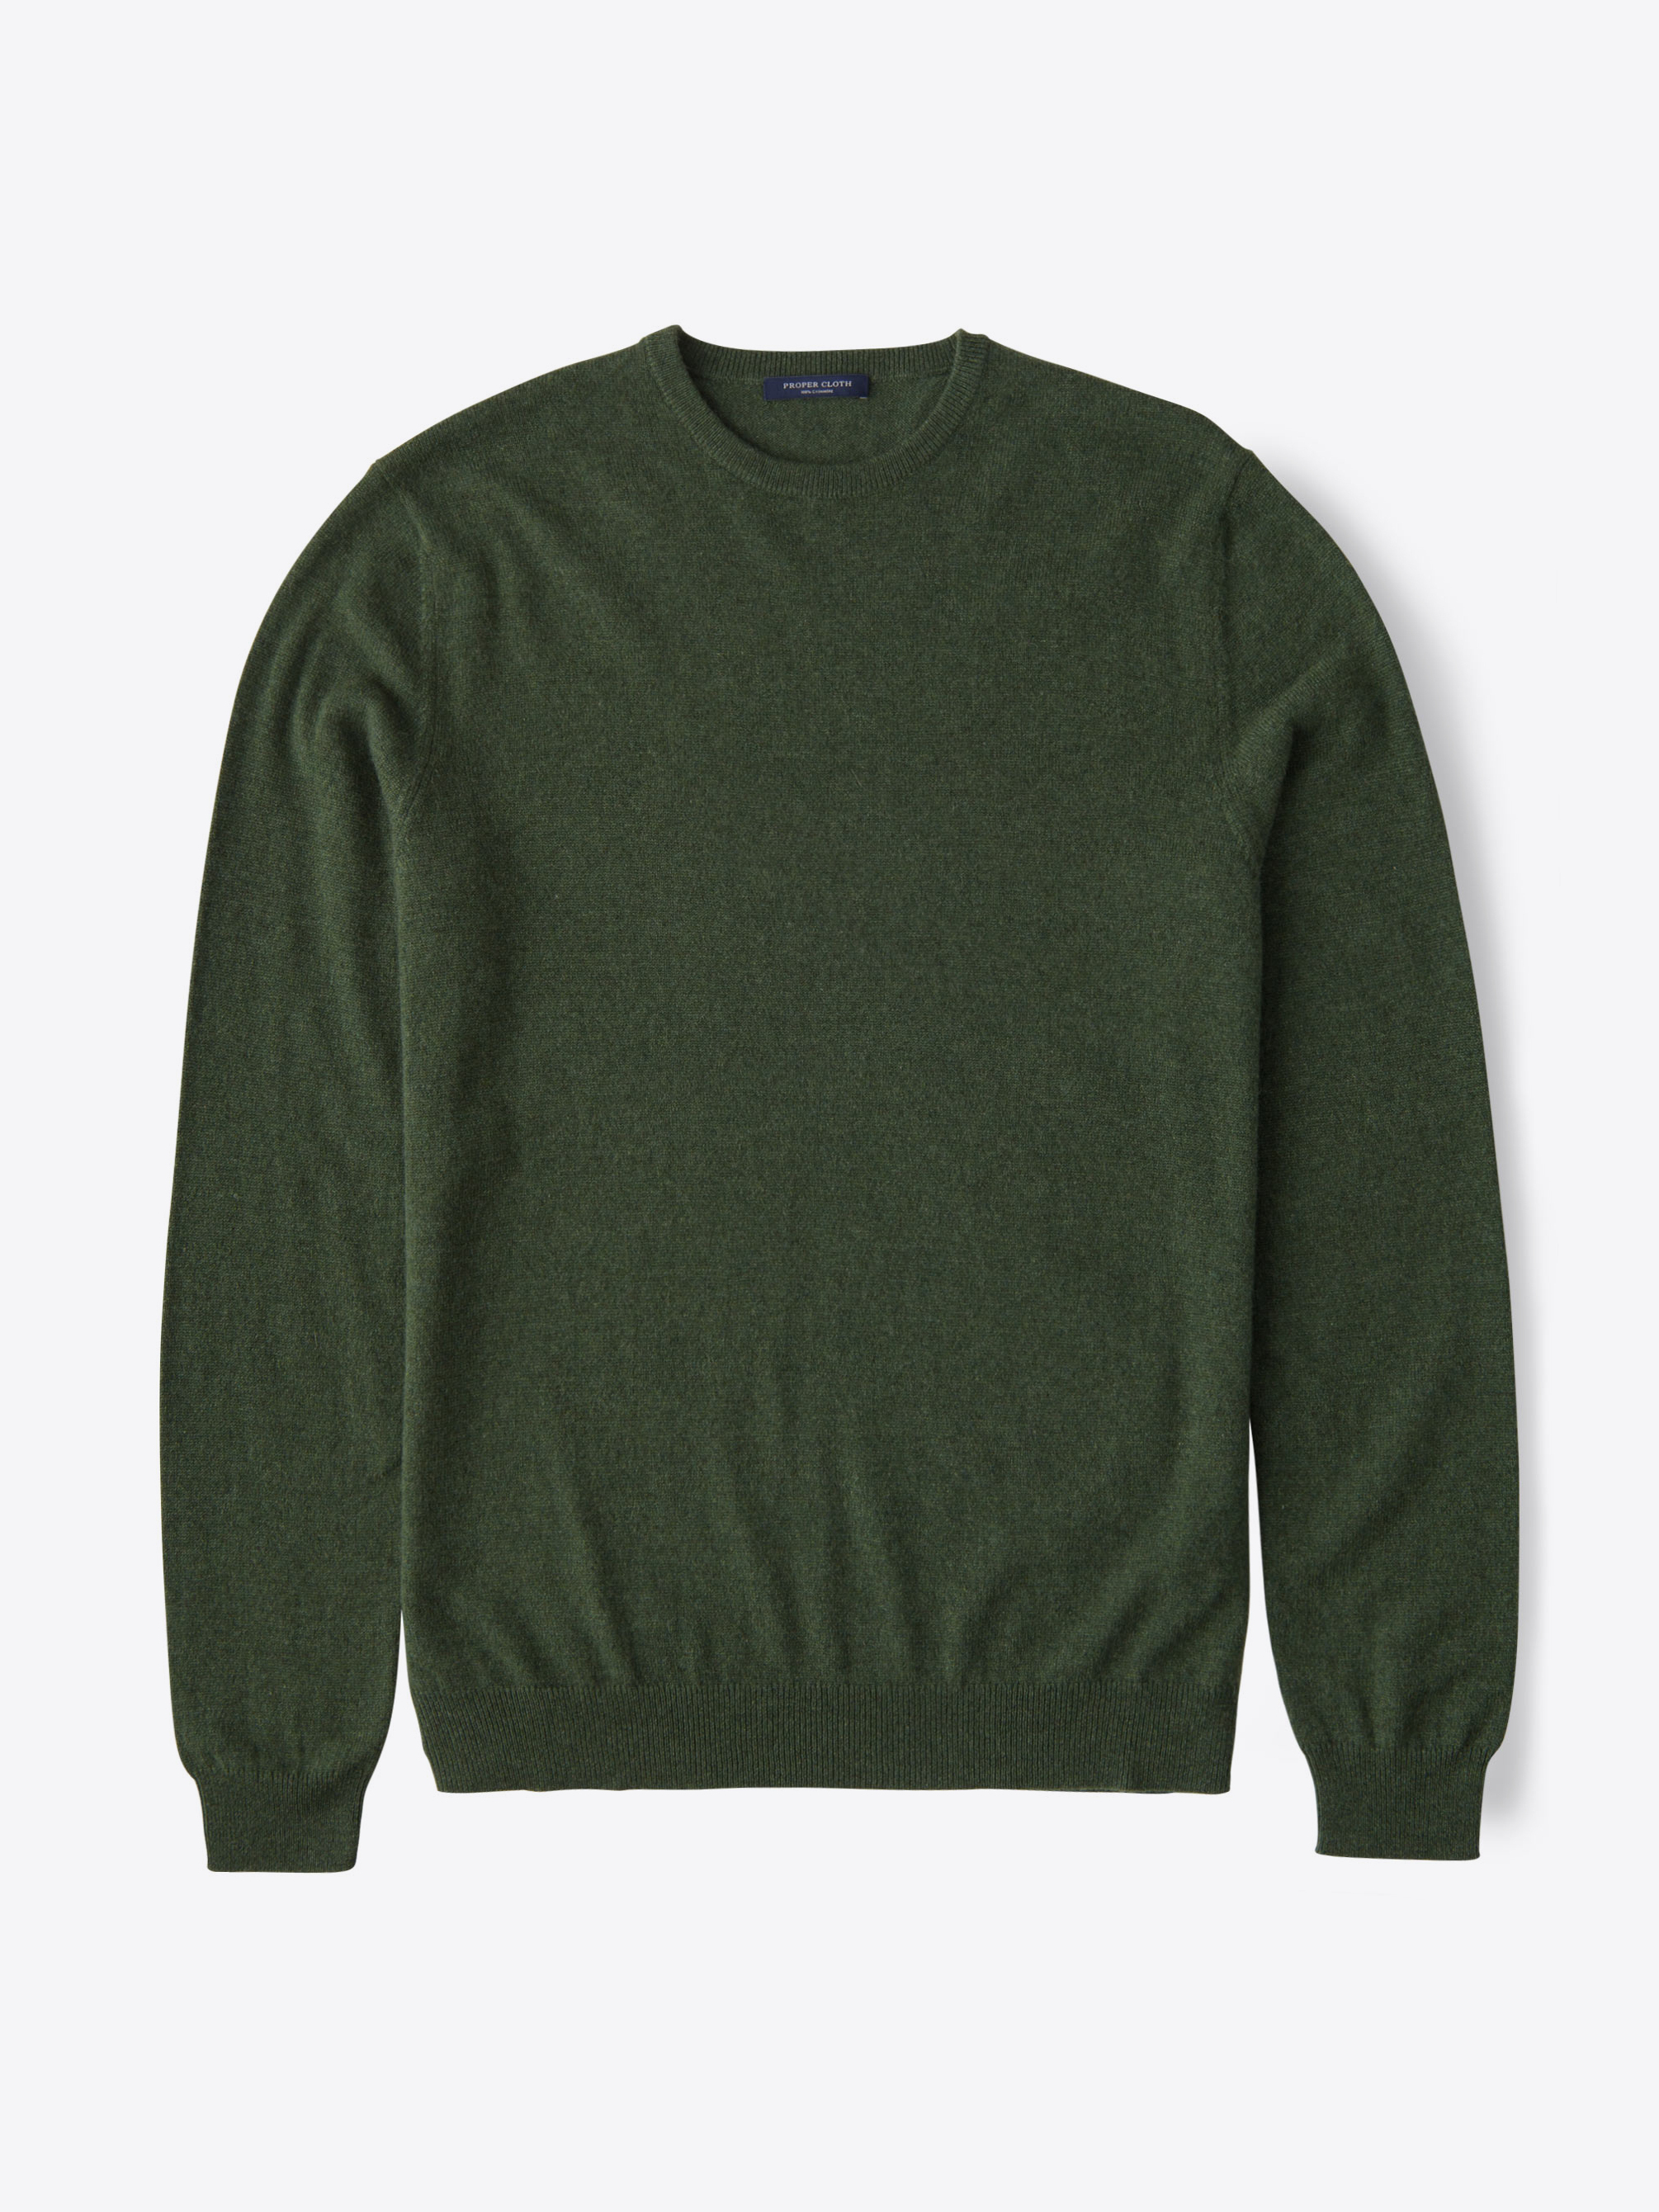 Zoom Image of Loden Cashmere Crewneck